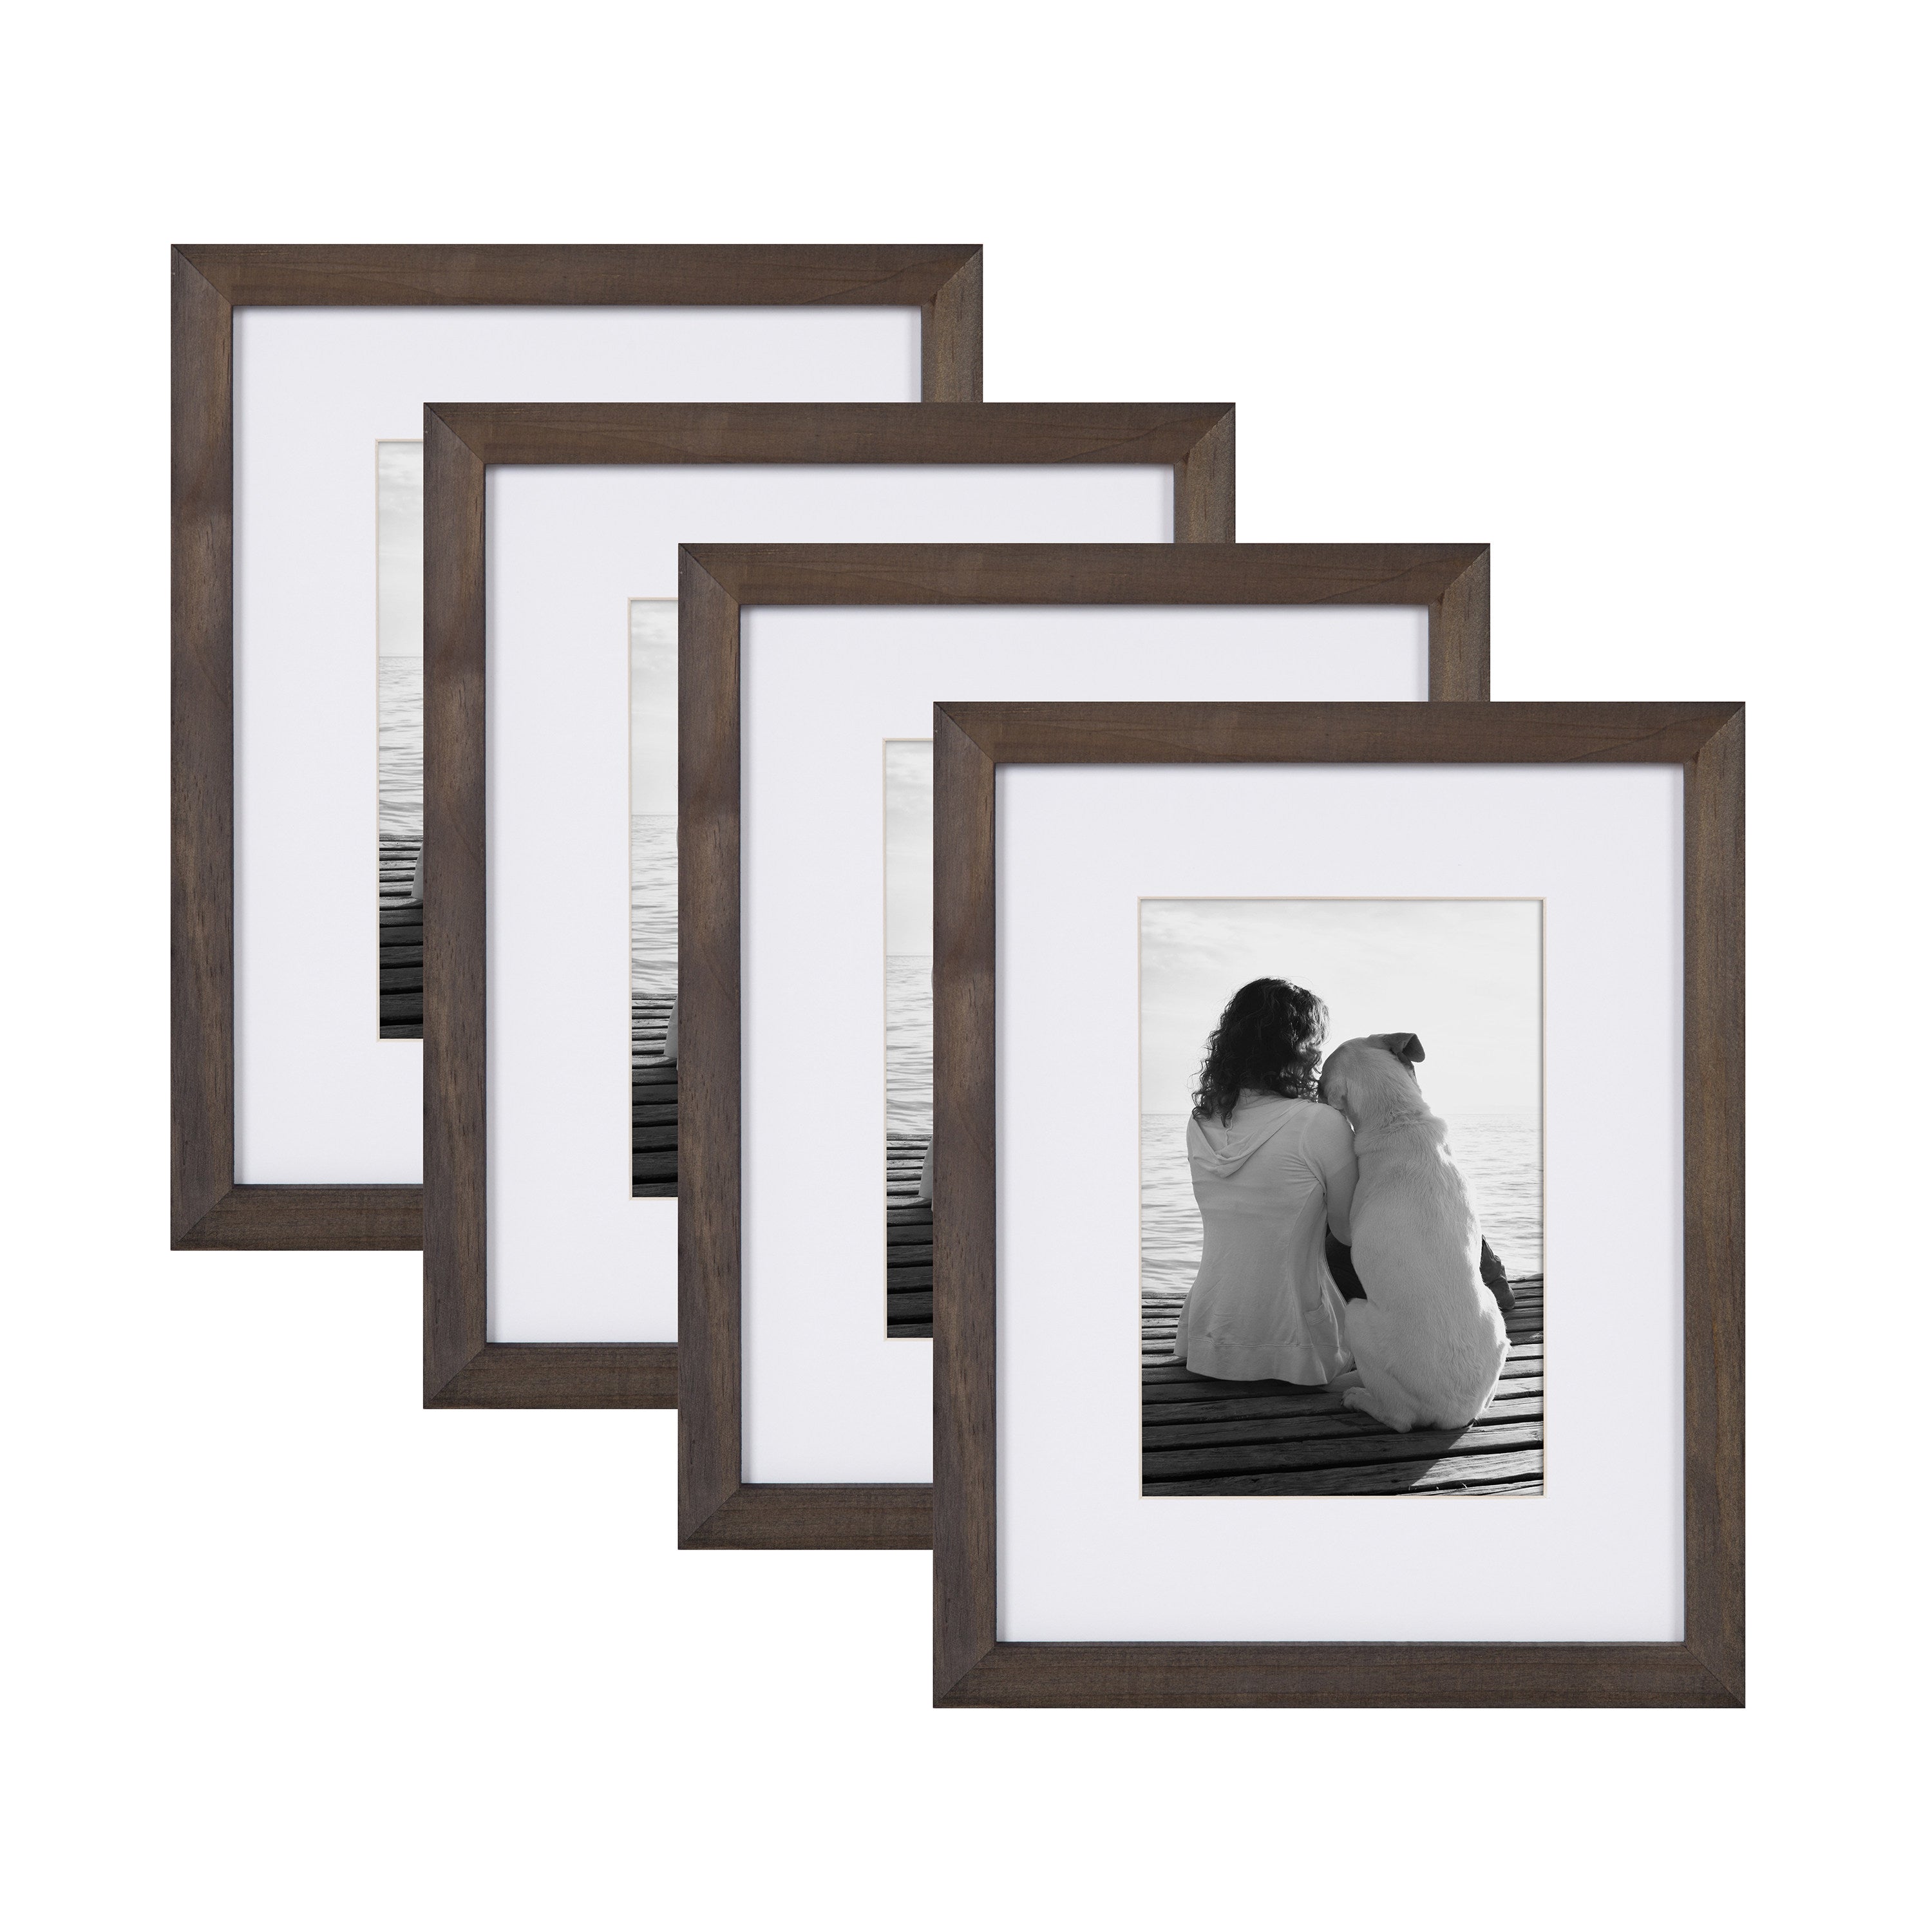 DesignOvation Gallery Wood Photo Frame Set for Customizable Wall